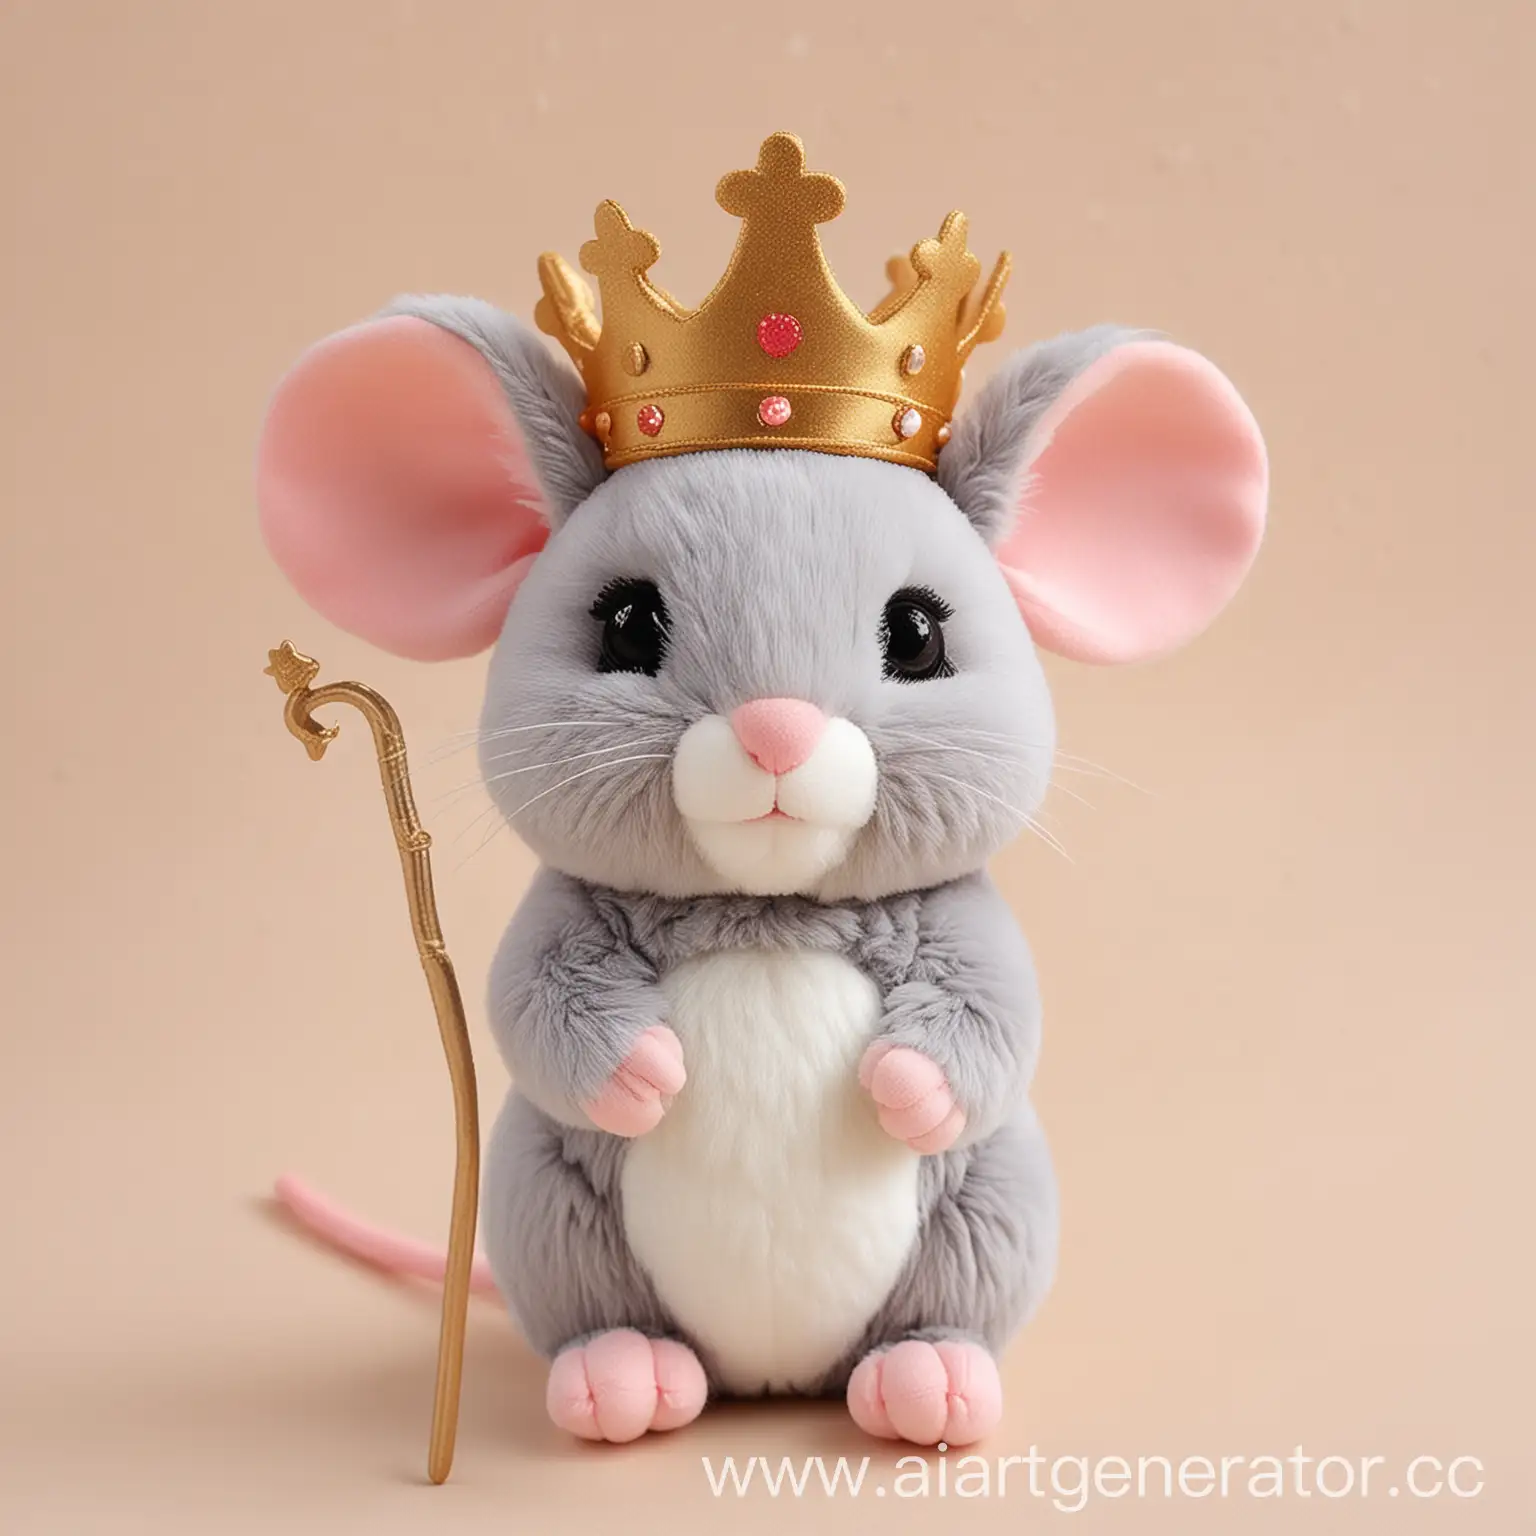 Adorable-Plush-Mouse-Toy-Wearing-Crown-and-Wielding-Magic-Wand